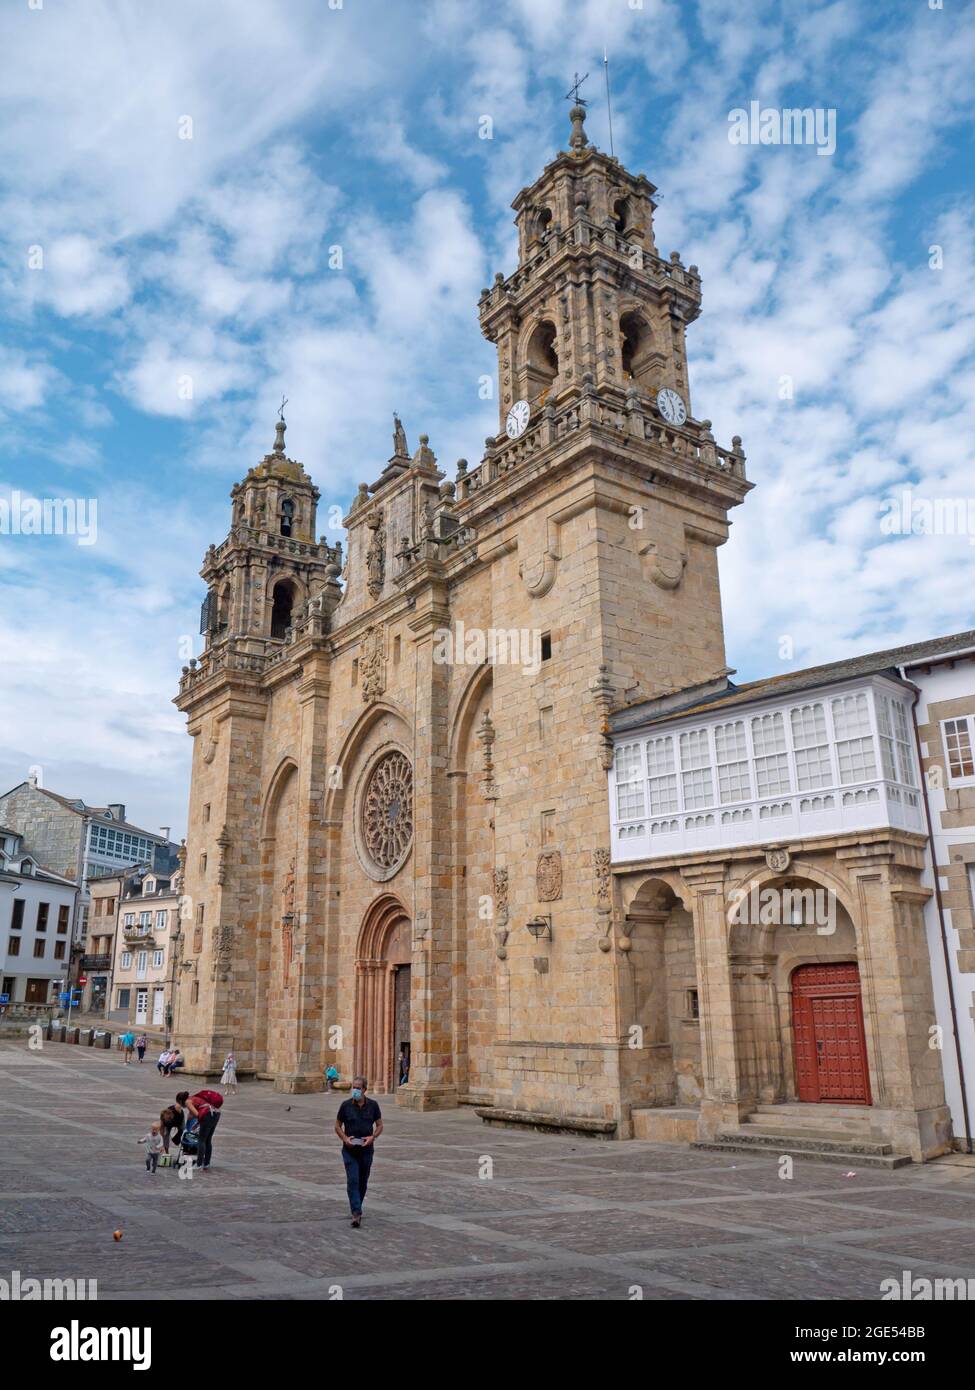 MONDONEDO, SPAIN - AUGUST 08, 2021: Roman Catholic cathedral in the town of Mondonedo,Lugo,Galicia,Spain Stock Photo